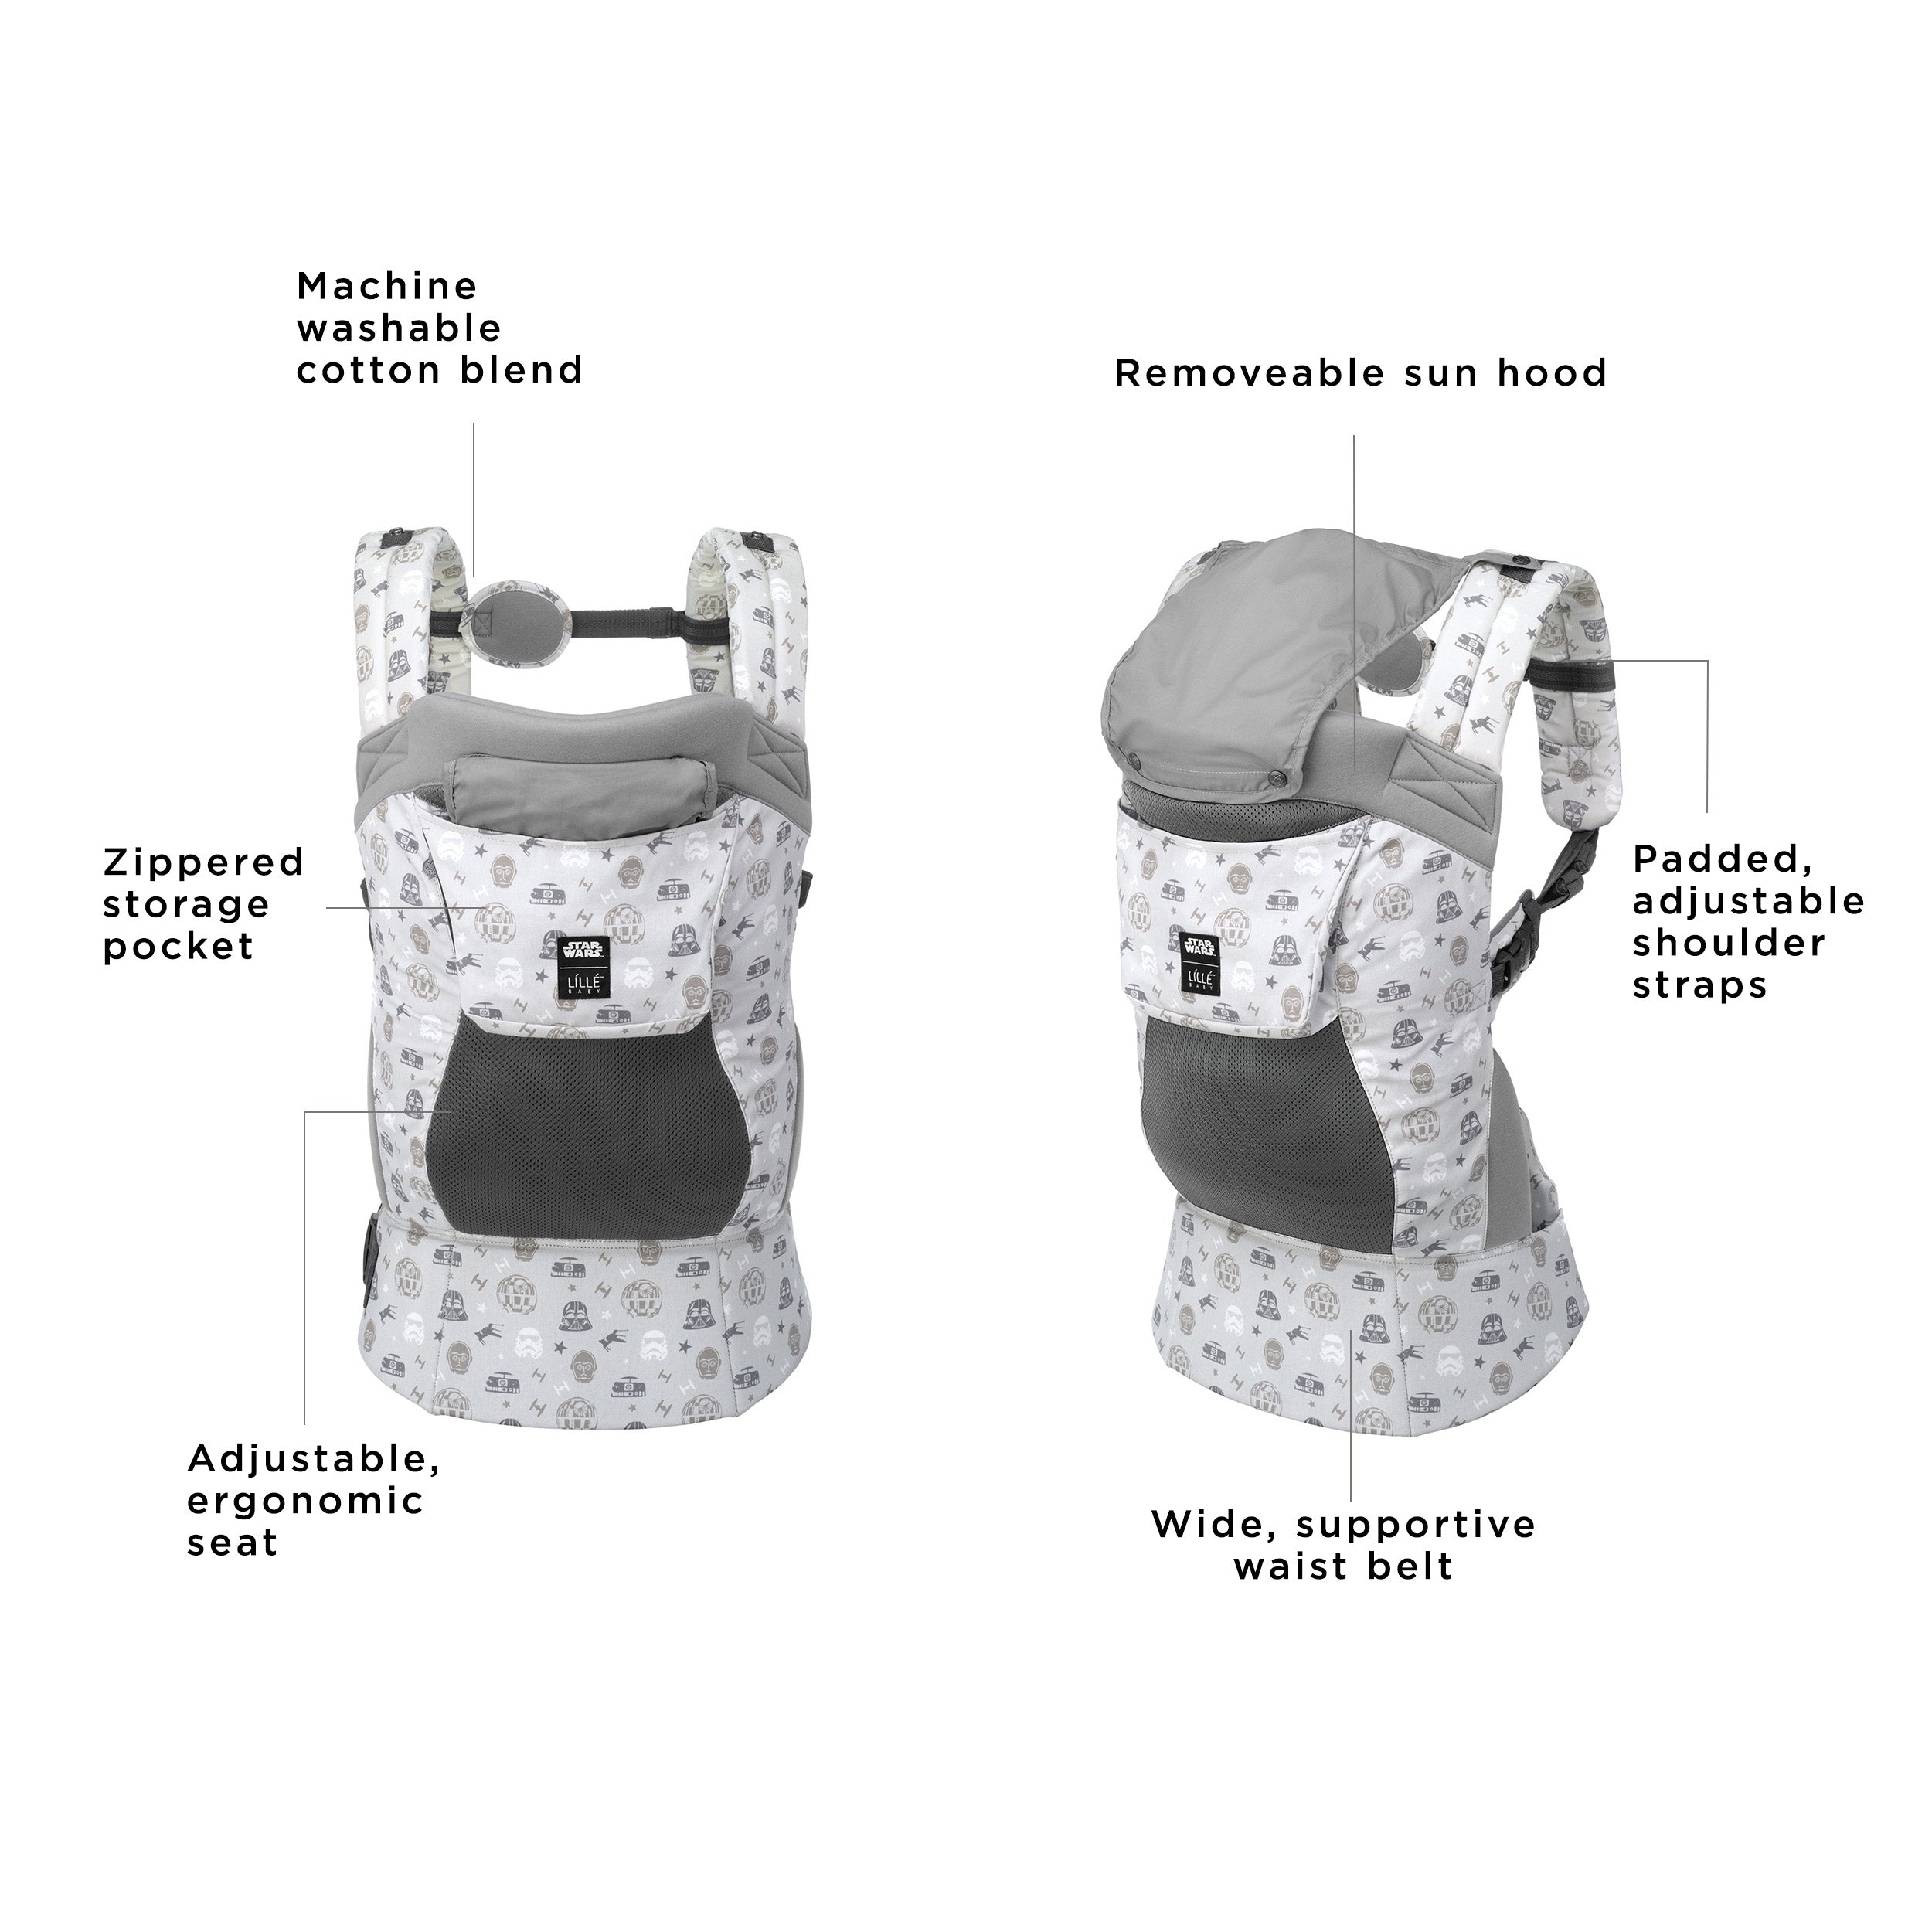 the carryon airflow dlx is a machine washable cotton blend, has a zippered storage pocket, adjustable ergonomic seat, removeable sun hood, padded adjustable shoulder straps, and wide supportive waist belt